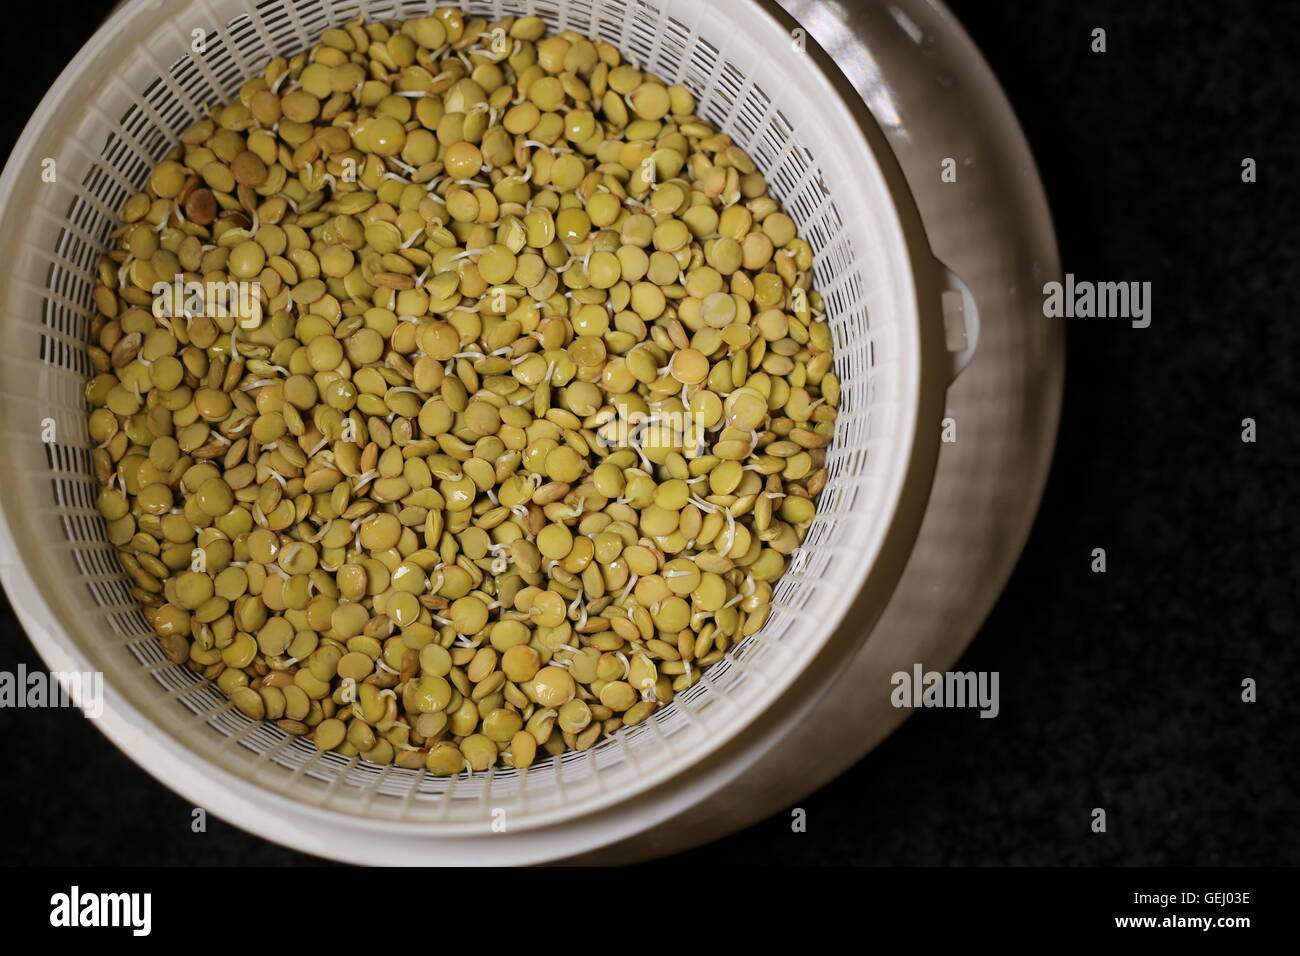 Germinated Lentils. Brown lentils germinated in a plastic sieve, on a beige plate and dark background. Stock Photo